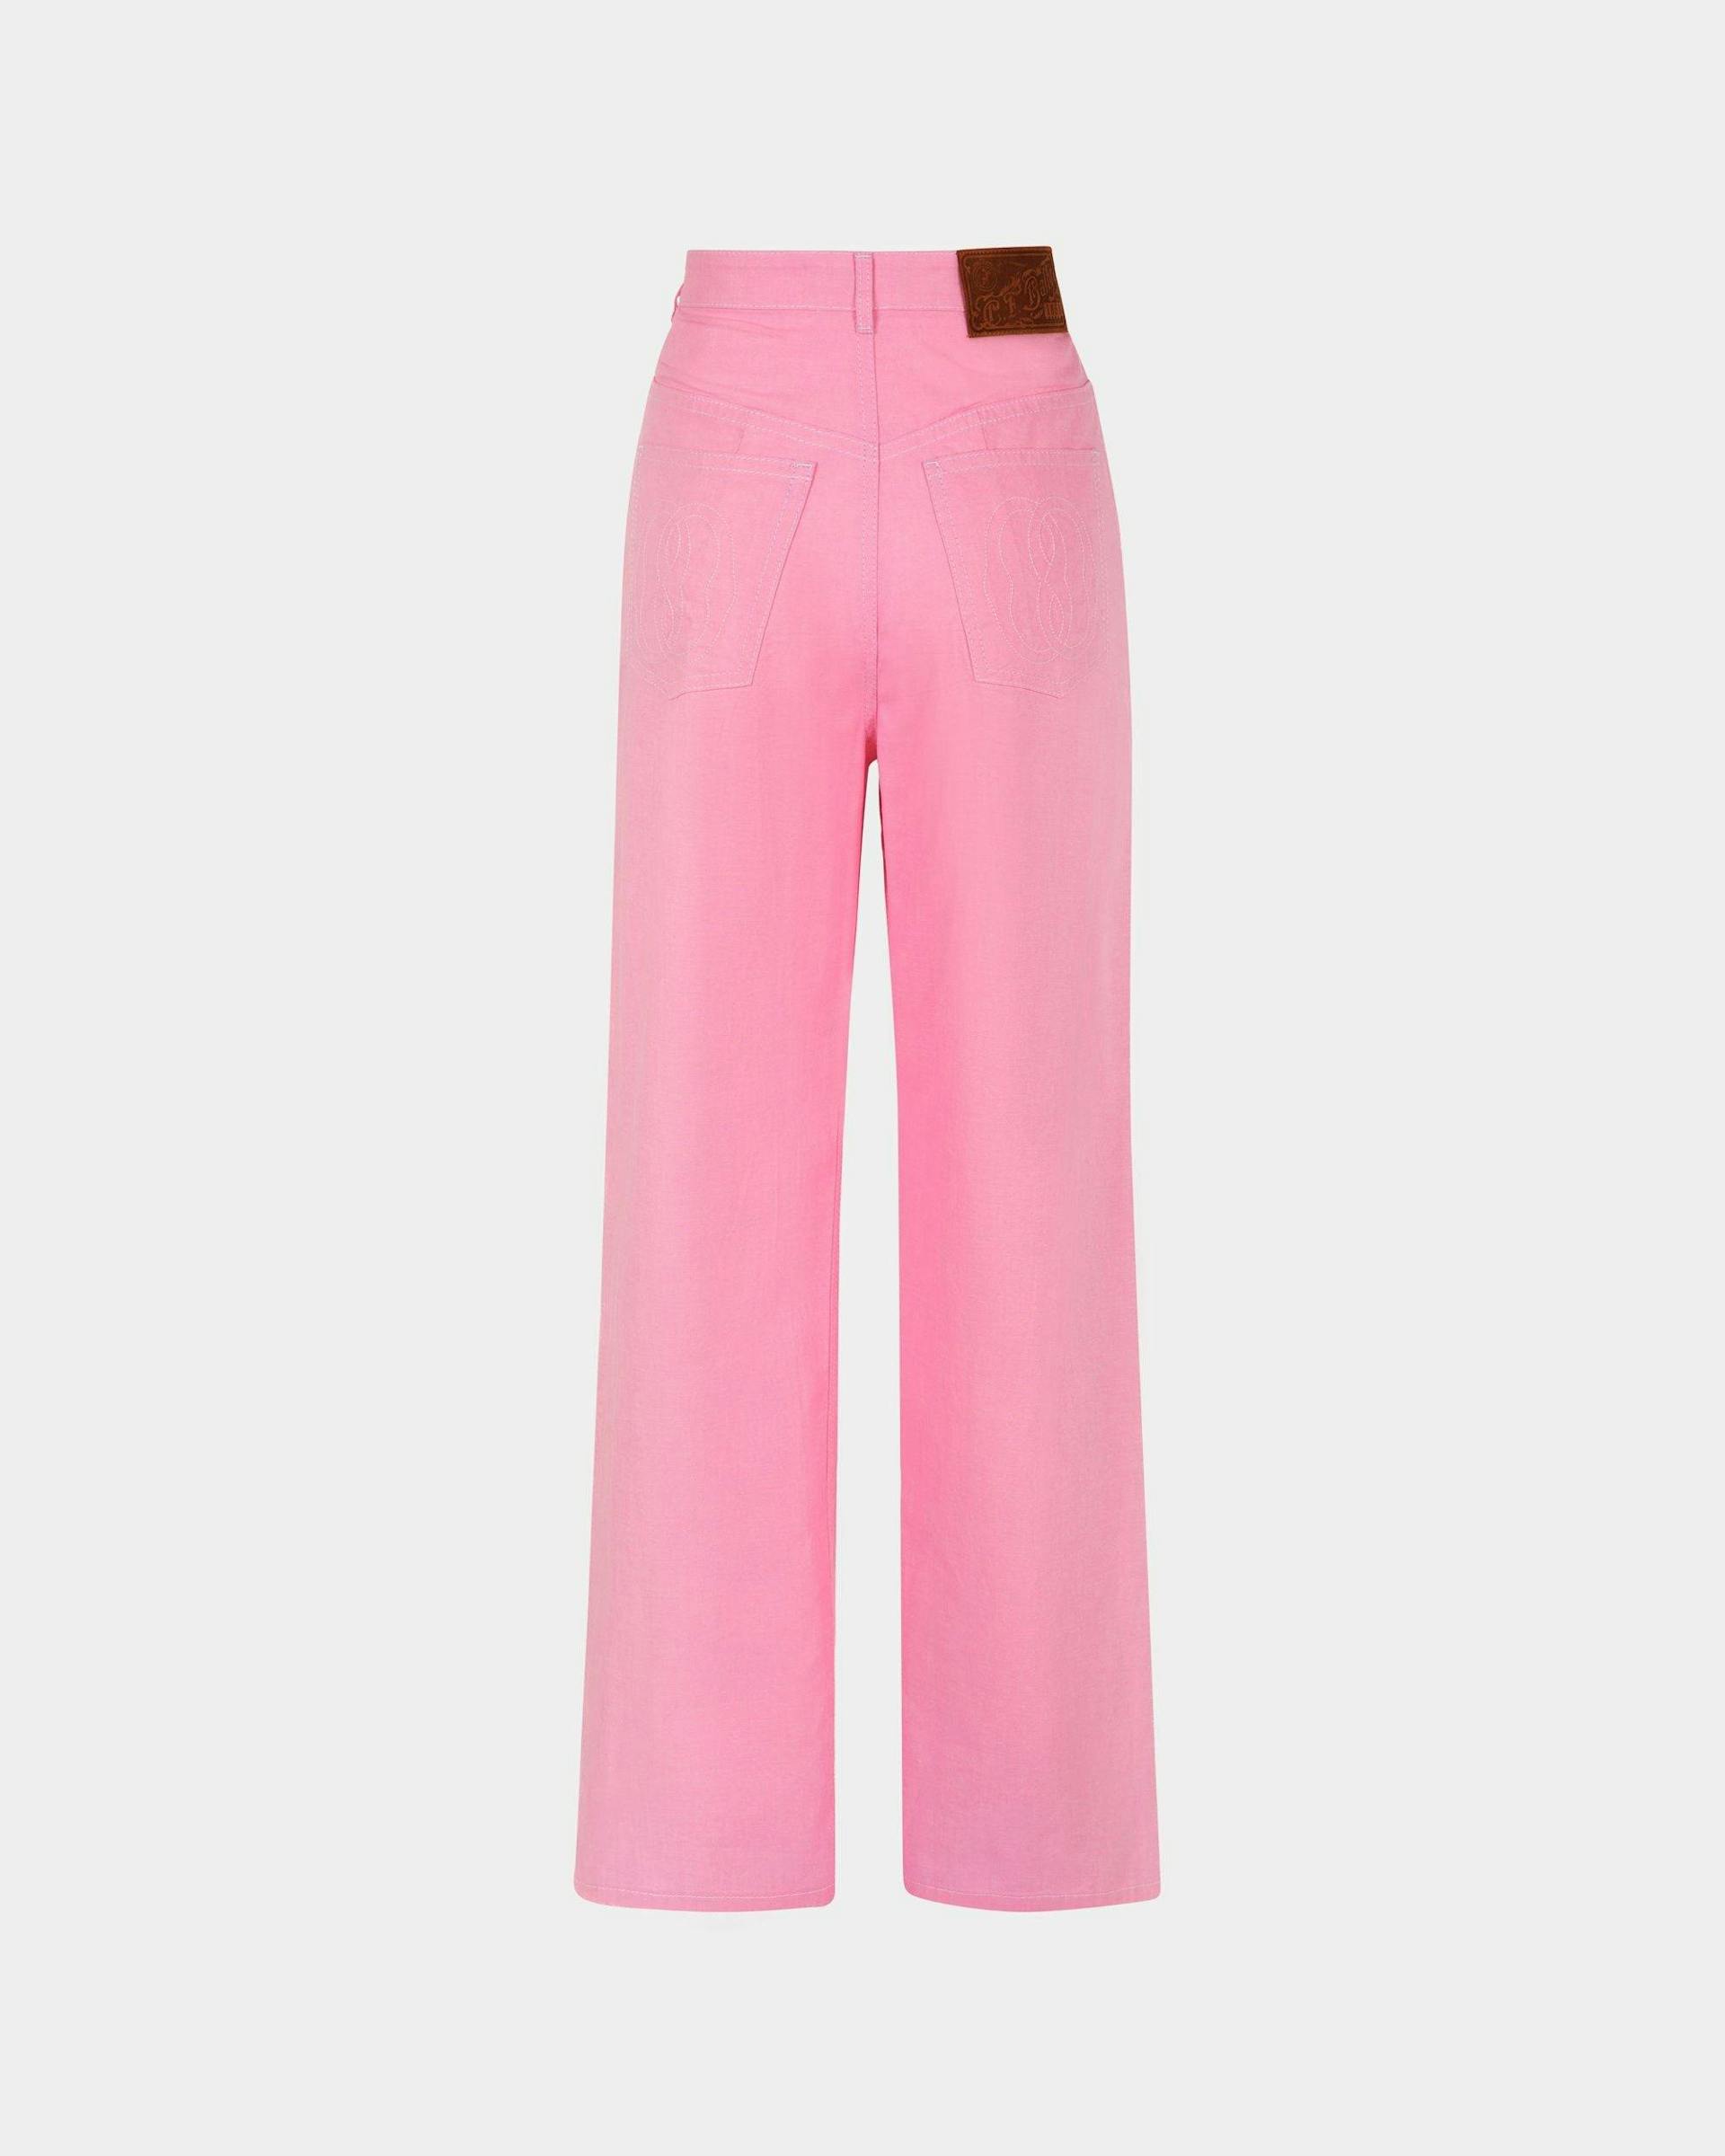 Women's Pants in Pink Cotton | Bally | Still Life Back